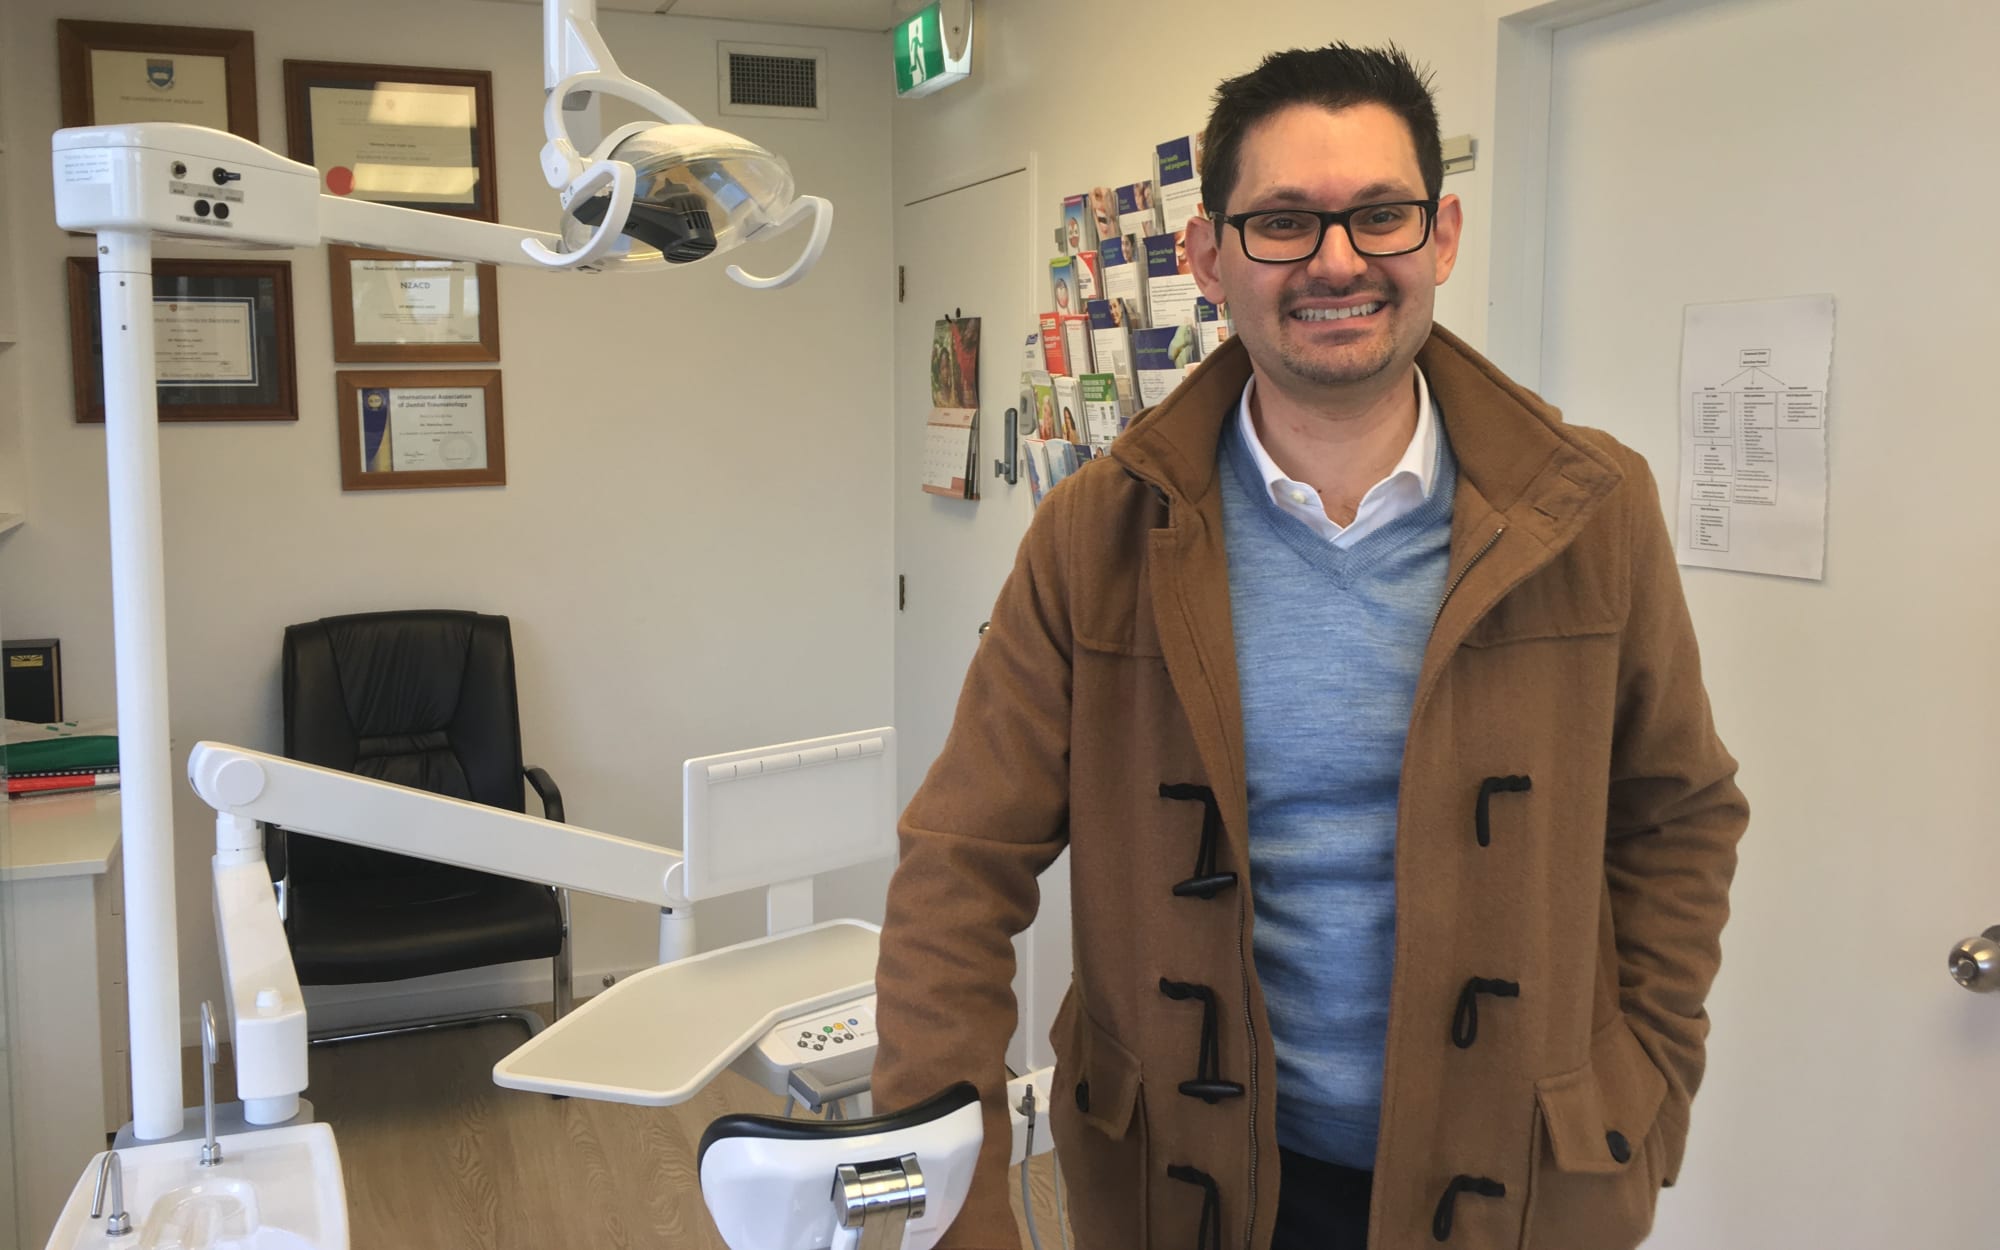 The Fono dental clinical director Mowafaq Amso says some of the clinic's patients struggle with the cost of dental care